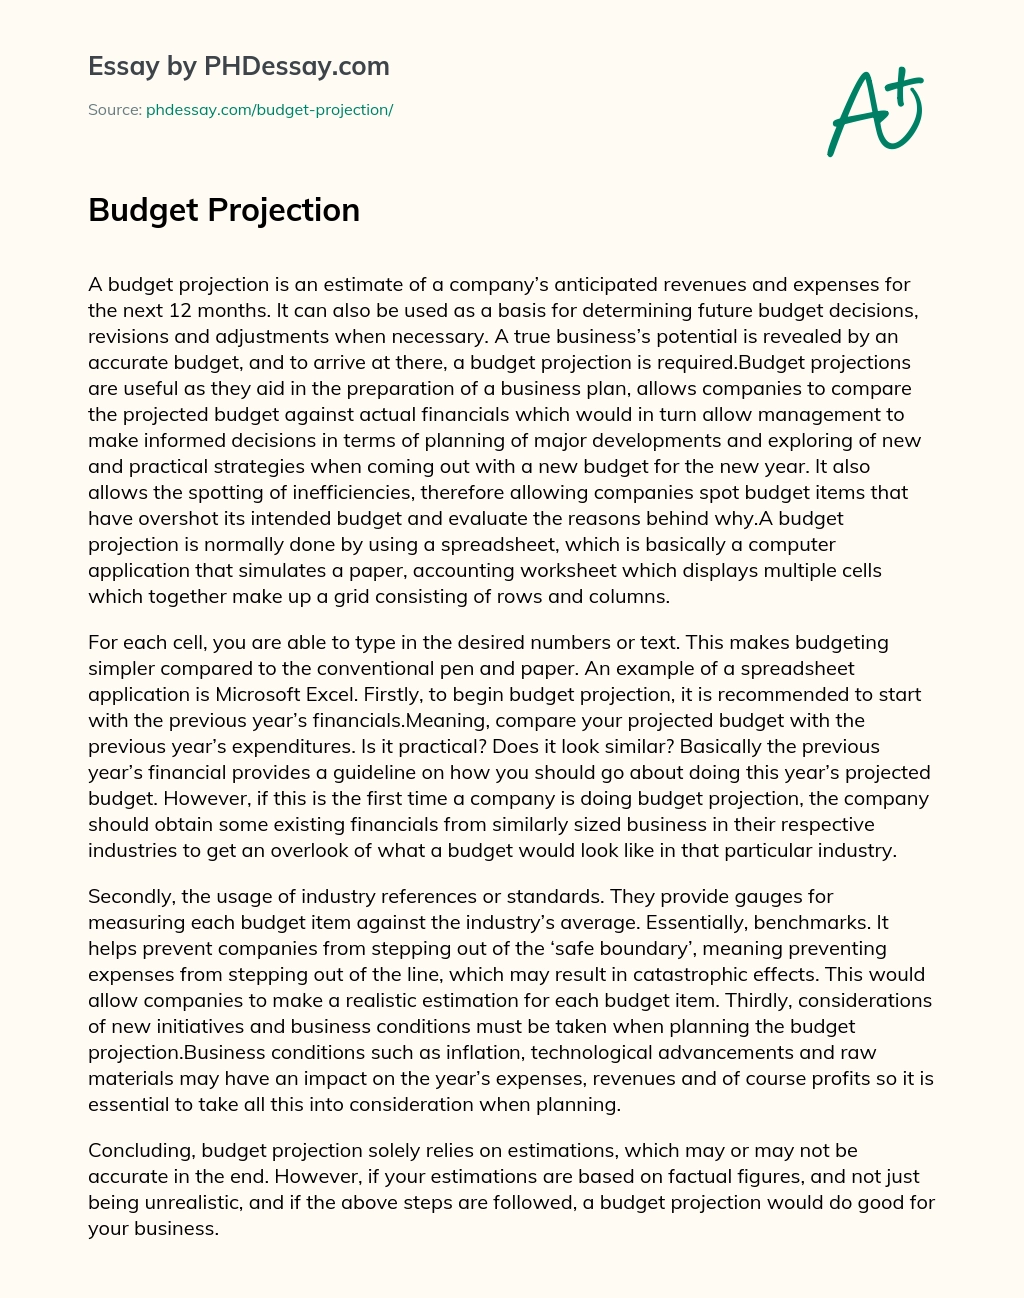 Budget Projection essay